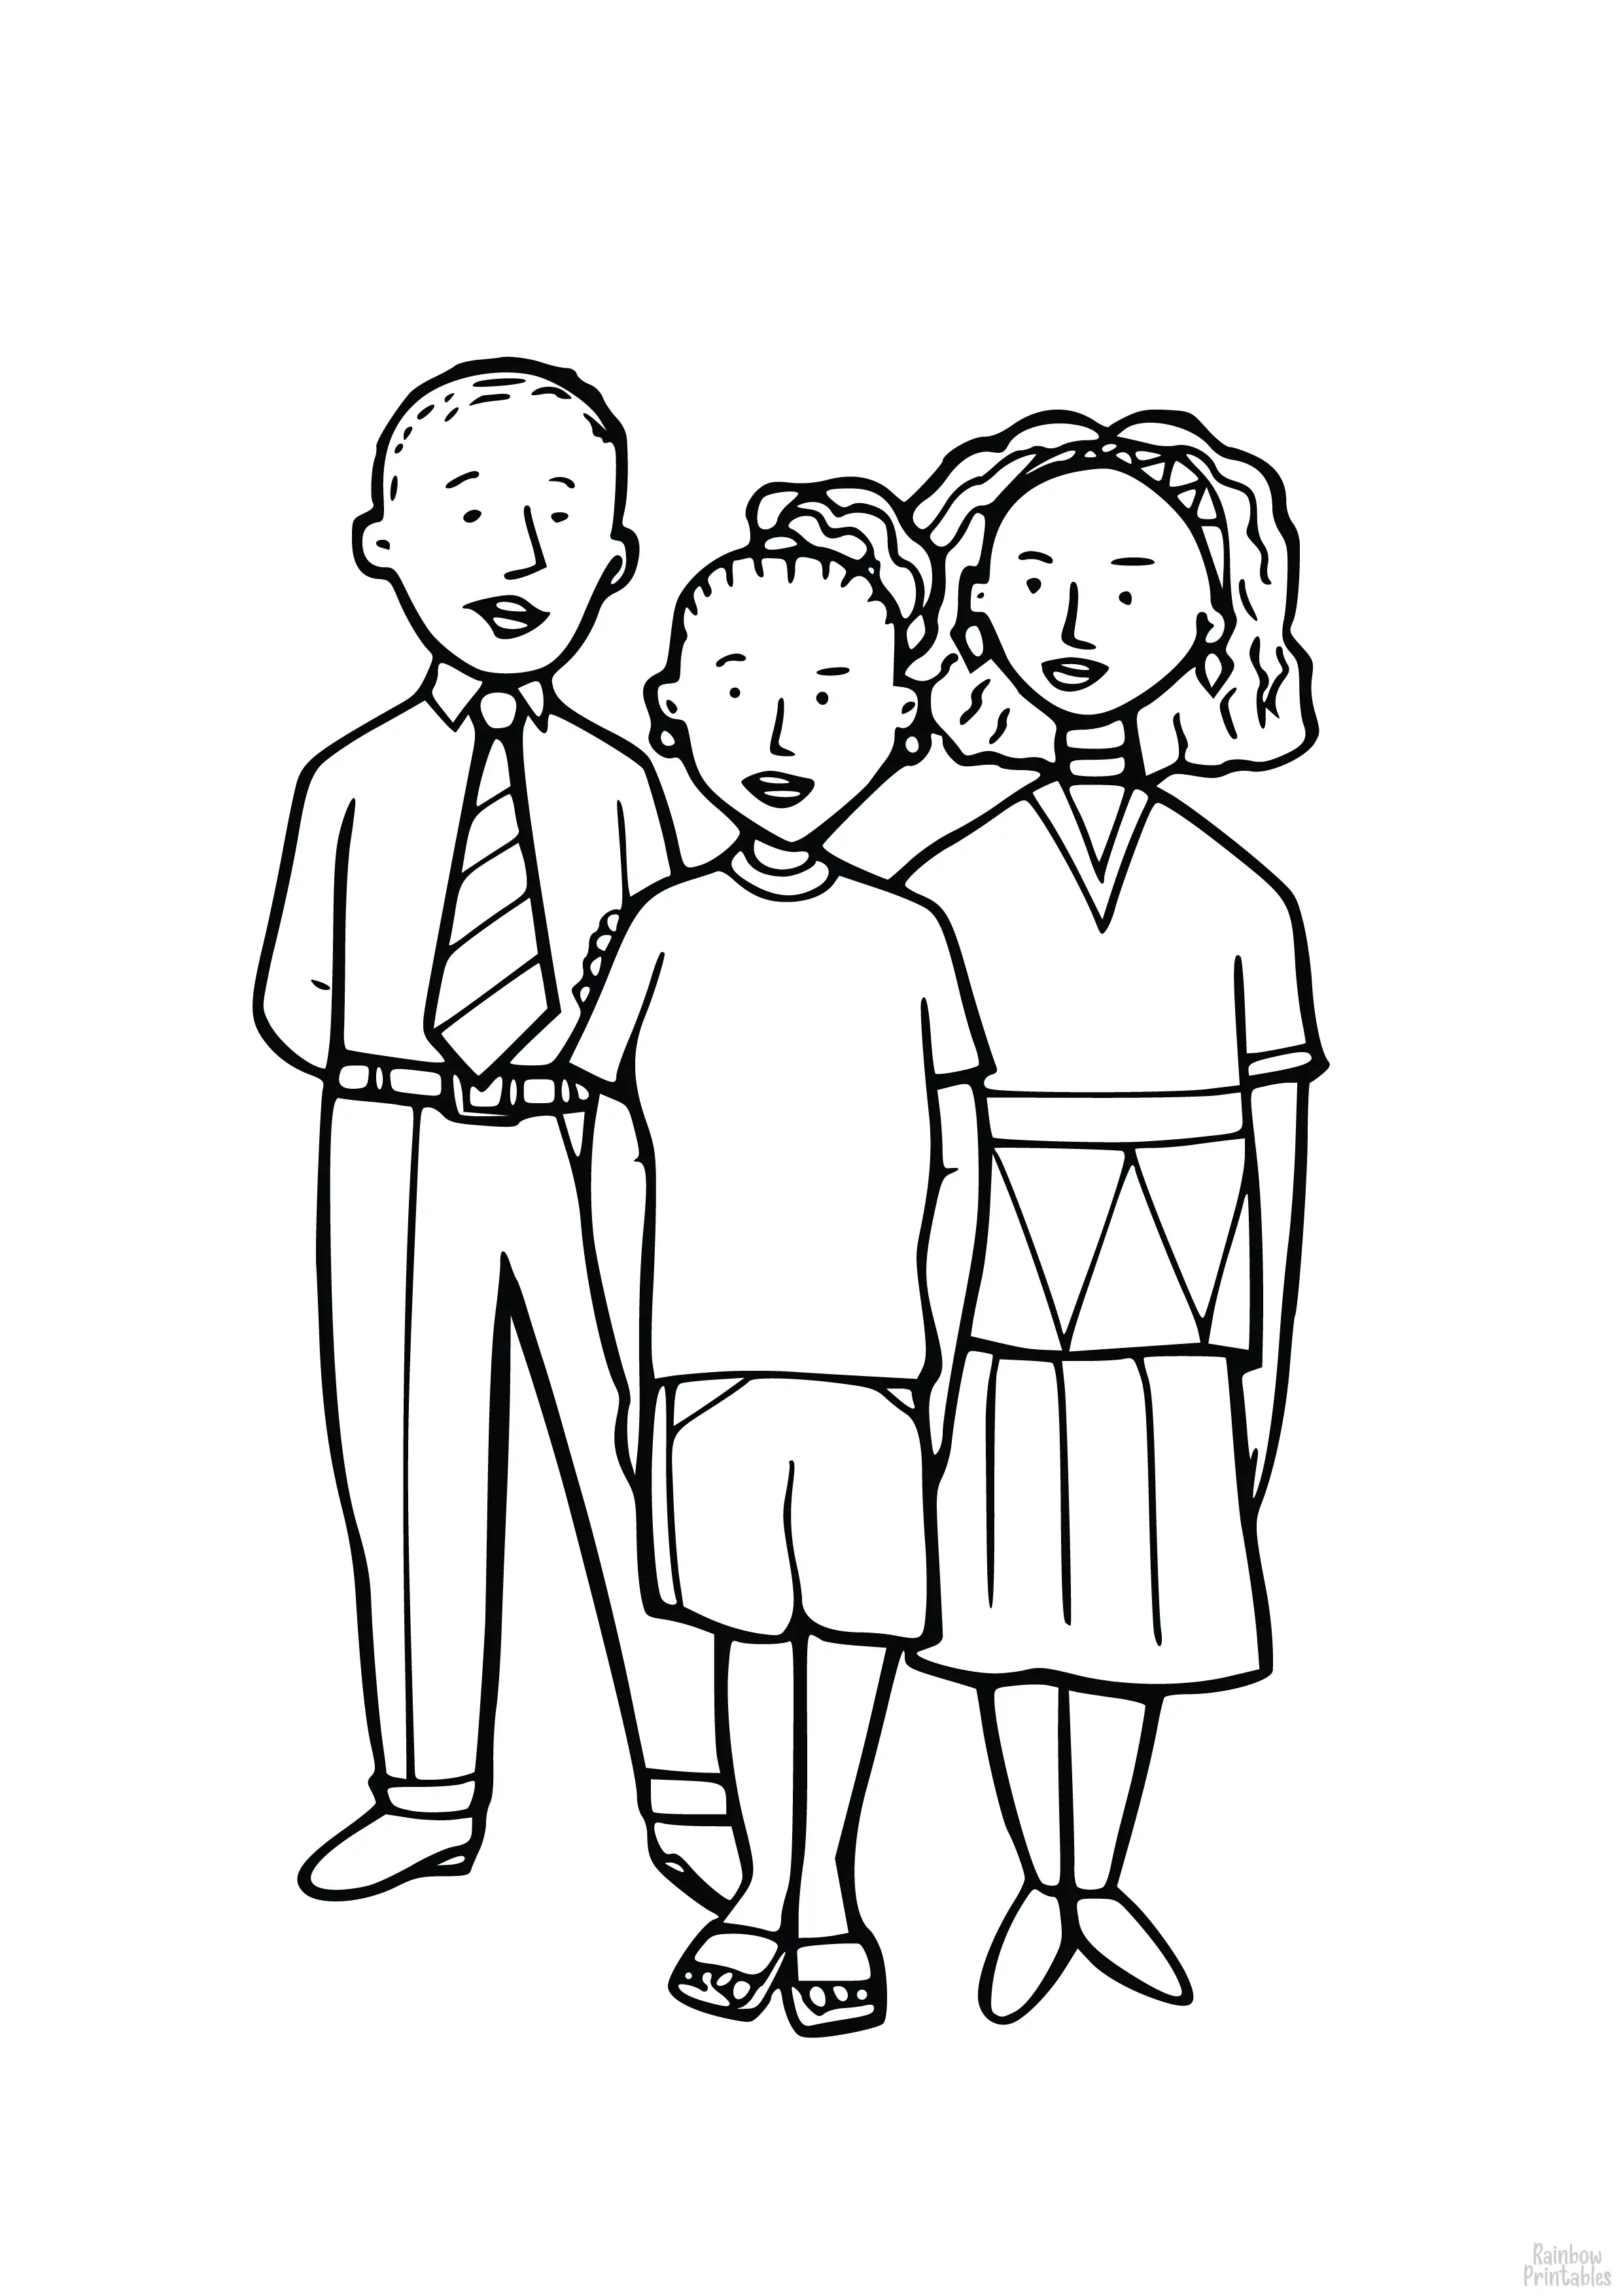 Family Mother Daughter Father Free Clipart Coloring Pages for Kids Adults Art Activities Line Art